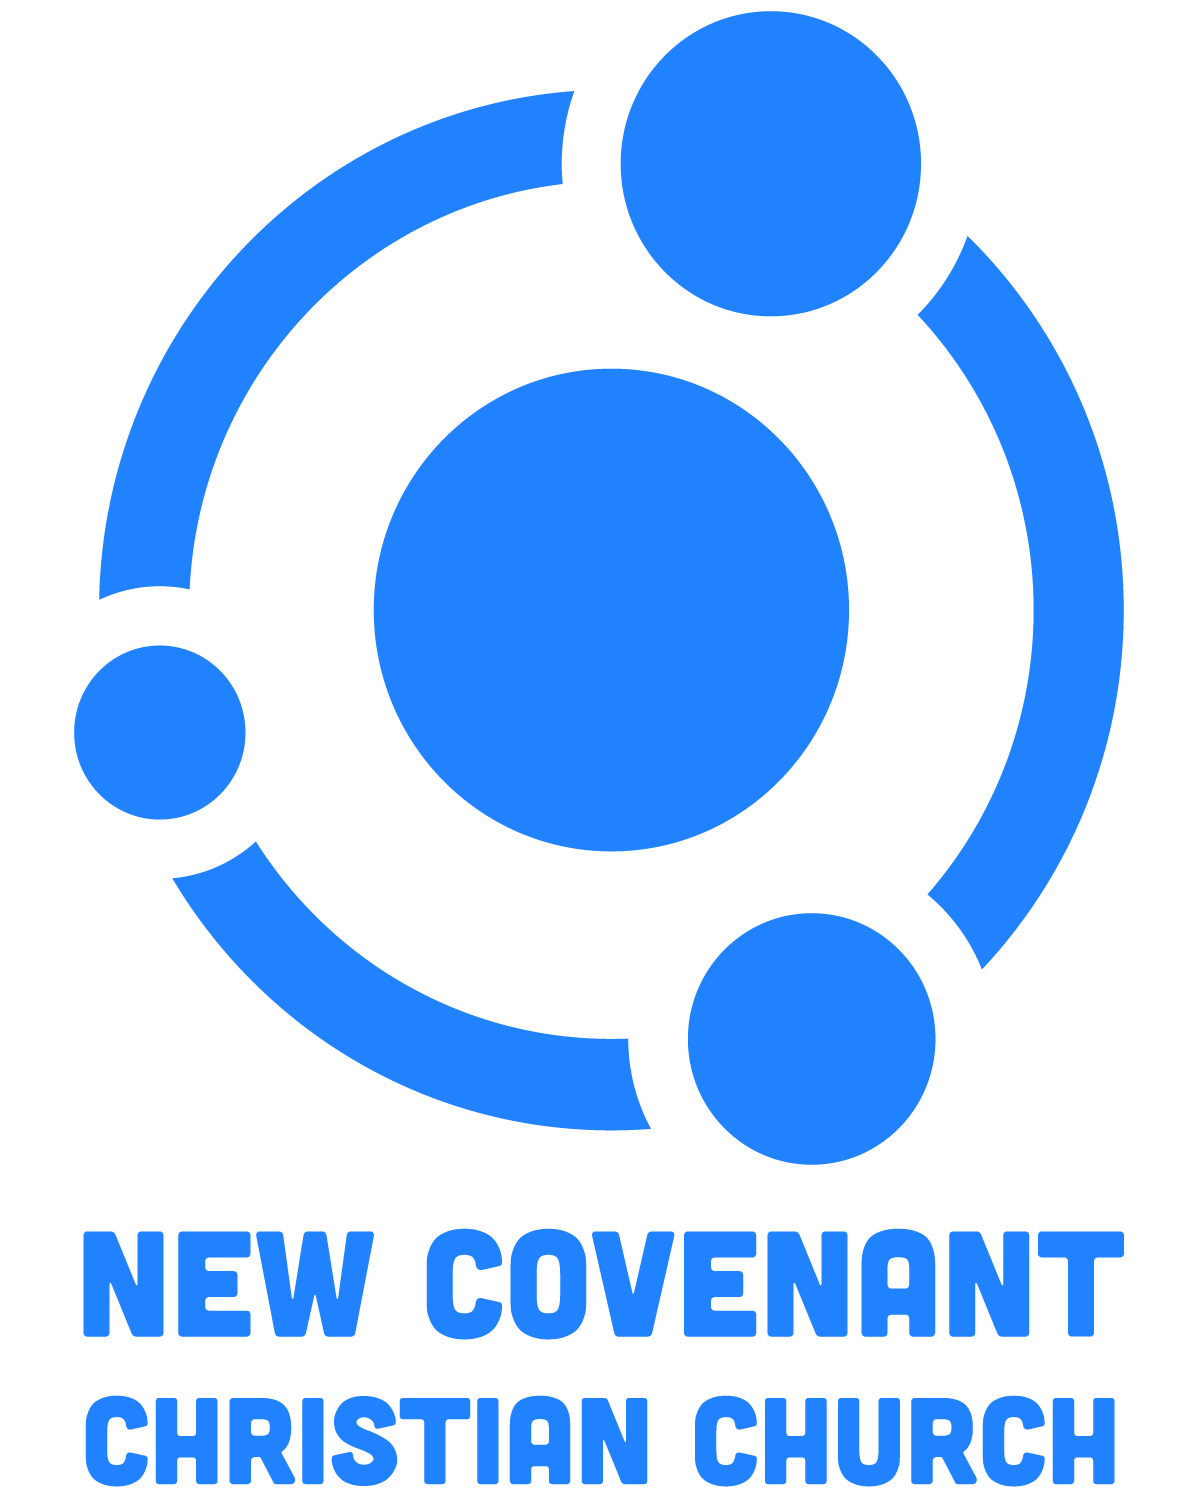 New Covenant Christian Church's Image